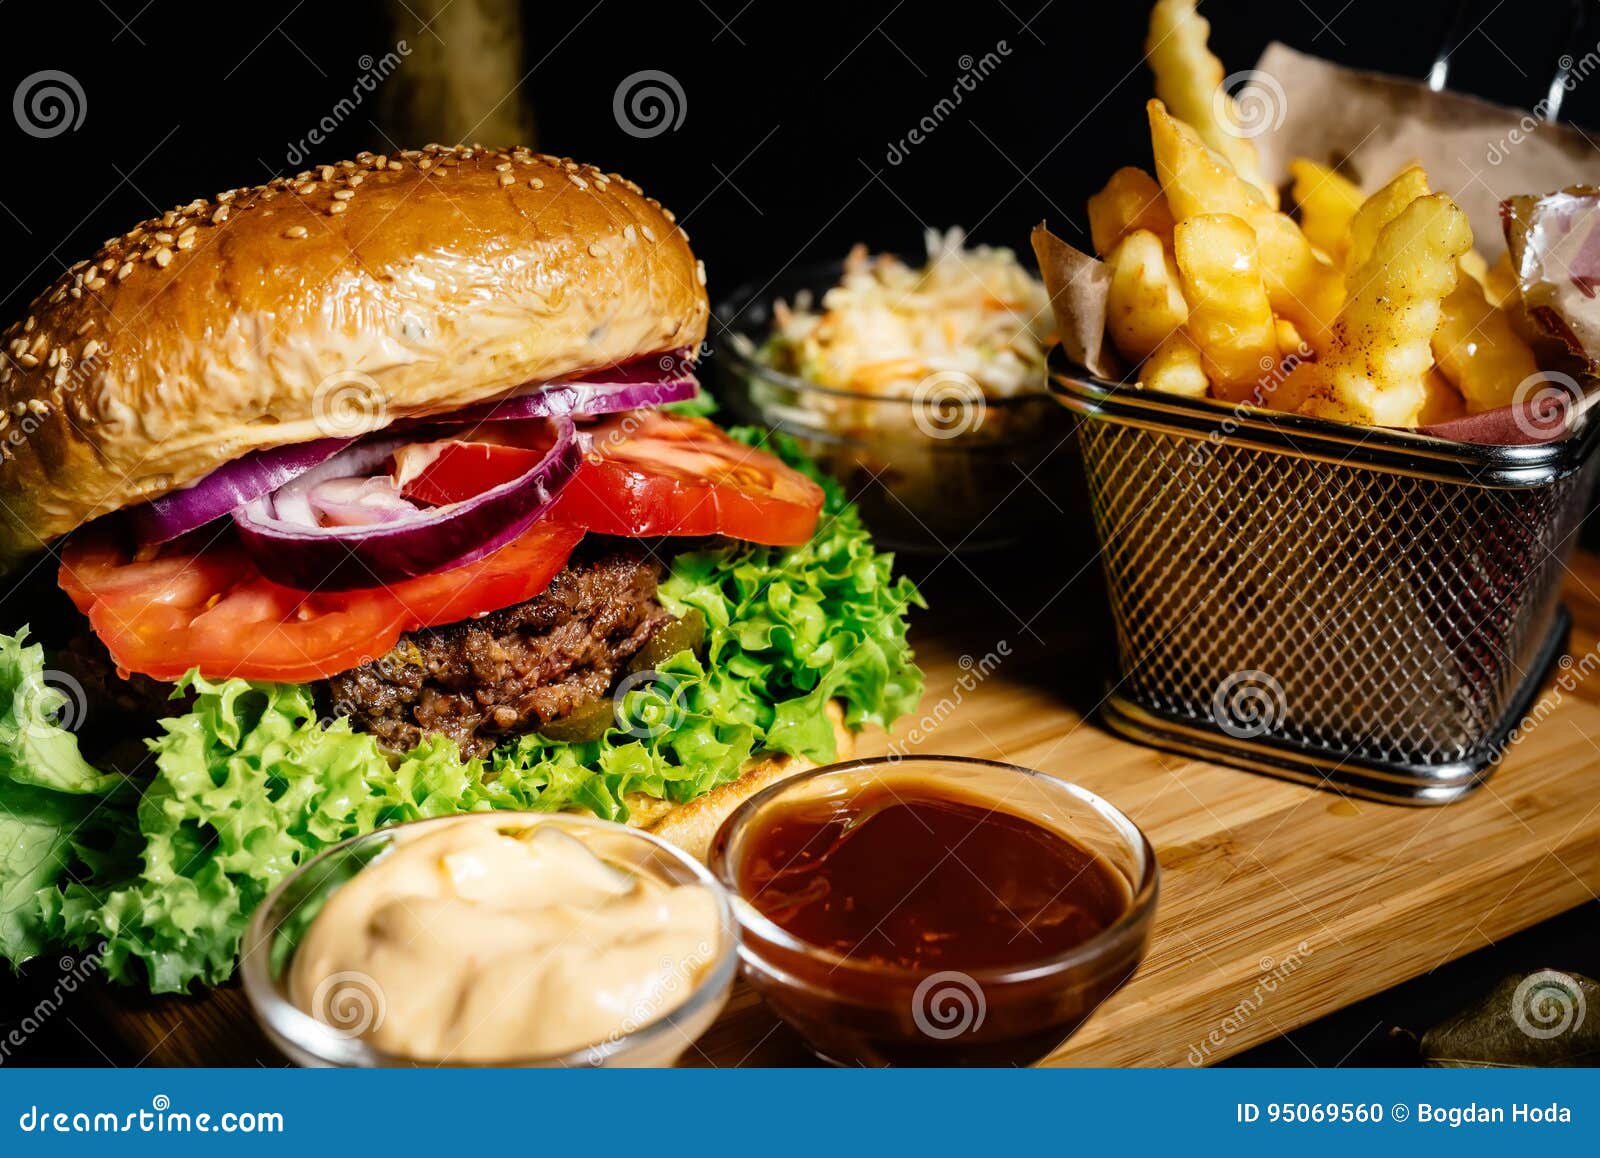 delicious juicy beef burger, american style food with french fries and coleslaw salad